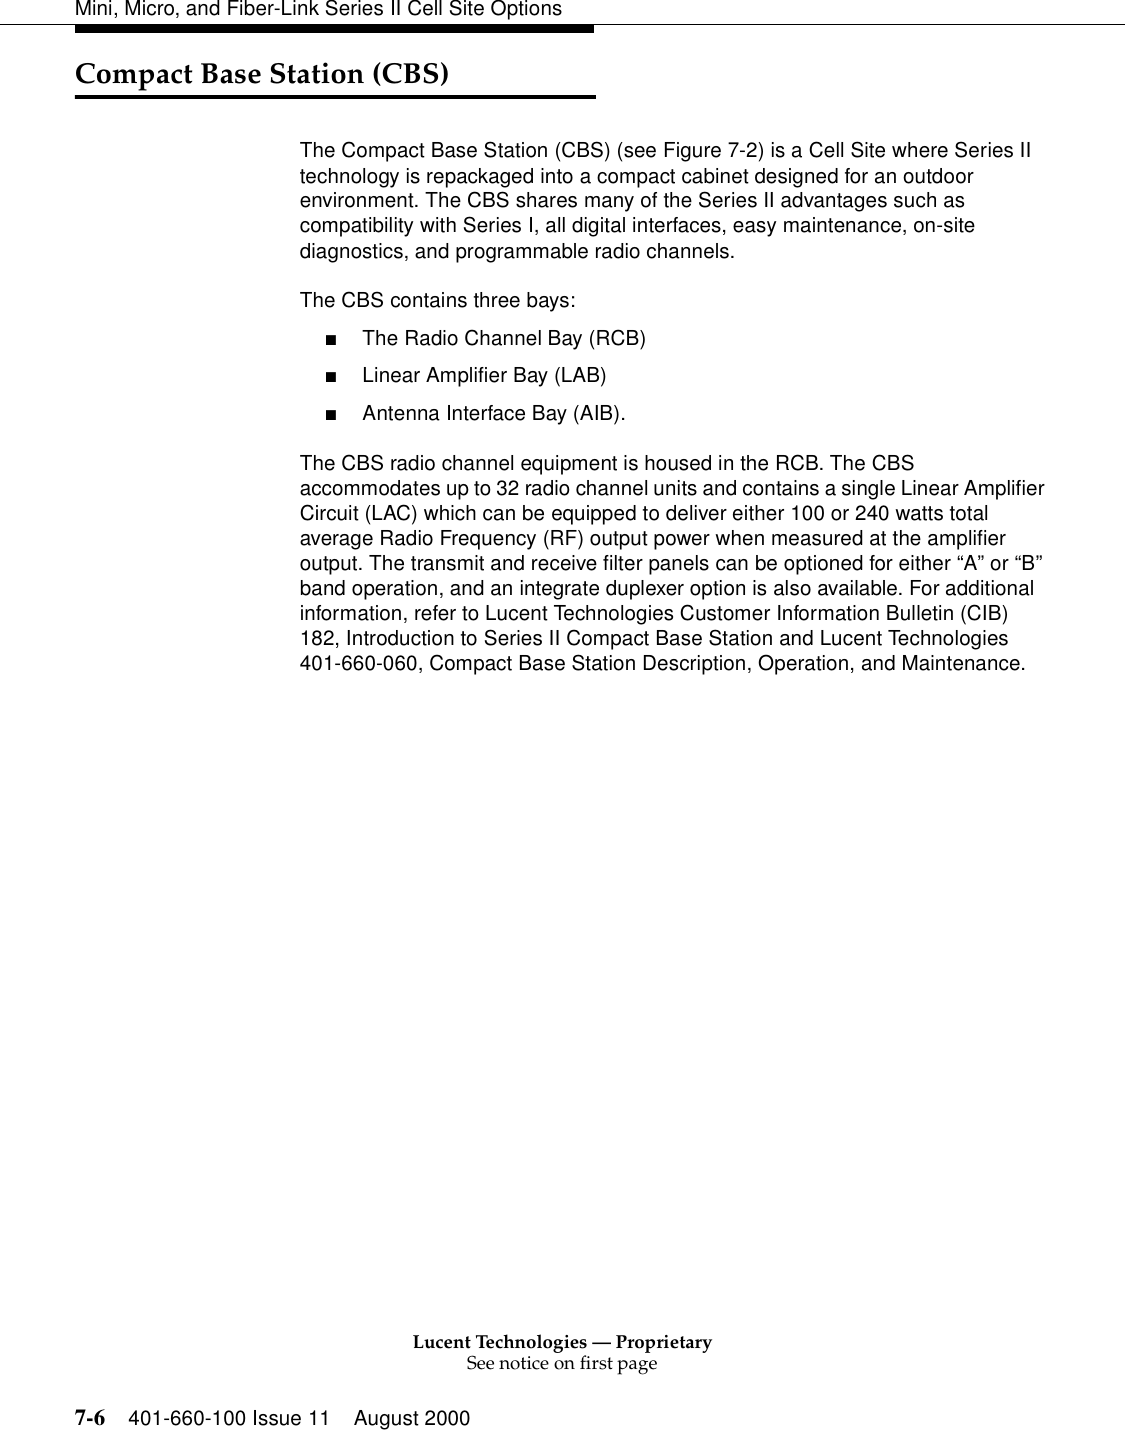 Lucent Technologies — ProprietarySee notice on first page7-6 401-660-100 Issue 11 August 2000Mini, Micro, and Fiber-Link Series II Cell Site OptionsCompact Base Station (CBS)The Compact Base Station (CBS) (see Figure 7-2) is a Cell Site where Series II technology is repackaged into a compact cabinet designed for an outdoor environment. The CBS shares many of the Series II advantages such as compatibility with Series I, all digital interfaces, easy maintenance, on-site diagnostics, and programmable radio channels. The CBS contains three bays: ■The Radio Channel Bay (RCB)■Linear Amplifier Bay (LAB)■Antenna Interface Bay (AIB). The CBS radio channel equipment is housed in the RCB. The CBS accommodates up to 32 radio channel units and contains a single Linear Amplifier Circuit (LAC) which can be equipped to deliver either 100 or 240 watts total average Radio Frequency (RF) output power when measured at the amplifier output. The transmit and receive filter panels can be optioned for either “A” or “B” band operation, and an integrate duplexer option is also available. For additional information, refer to Lucent Technologies Customer Information Bulletin (CIB) 182, Introduction to Series II Compact Base Station and Lucent Technologies 401-660-060, Compact Base Station Description, Operation, and Maintenance. 